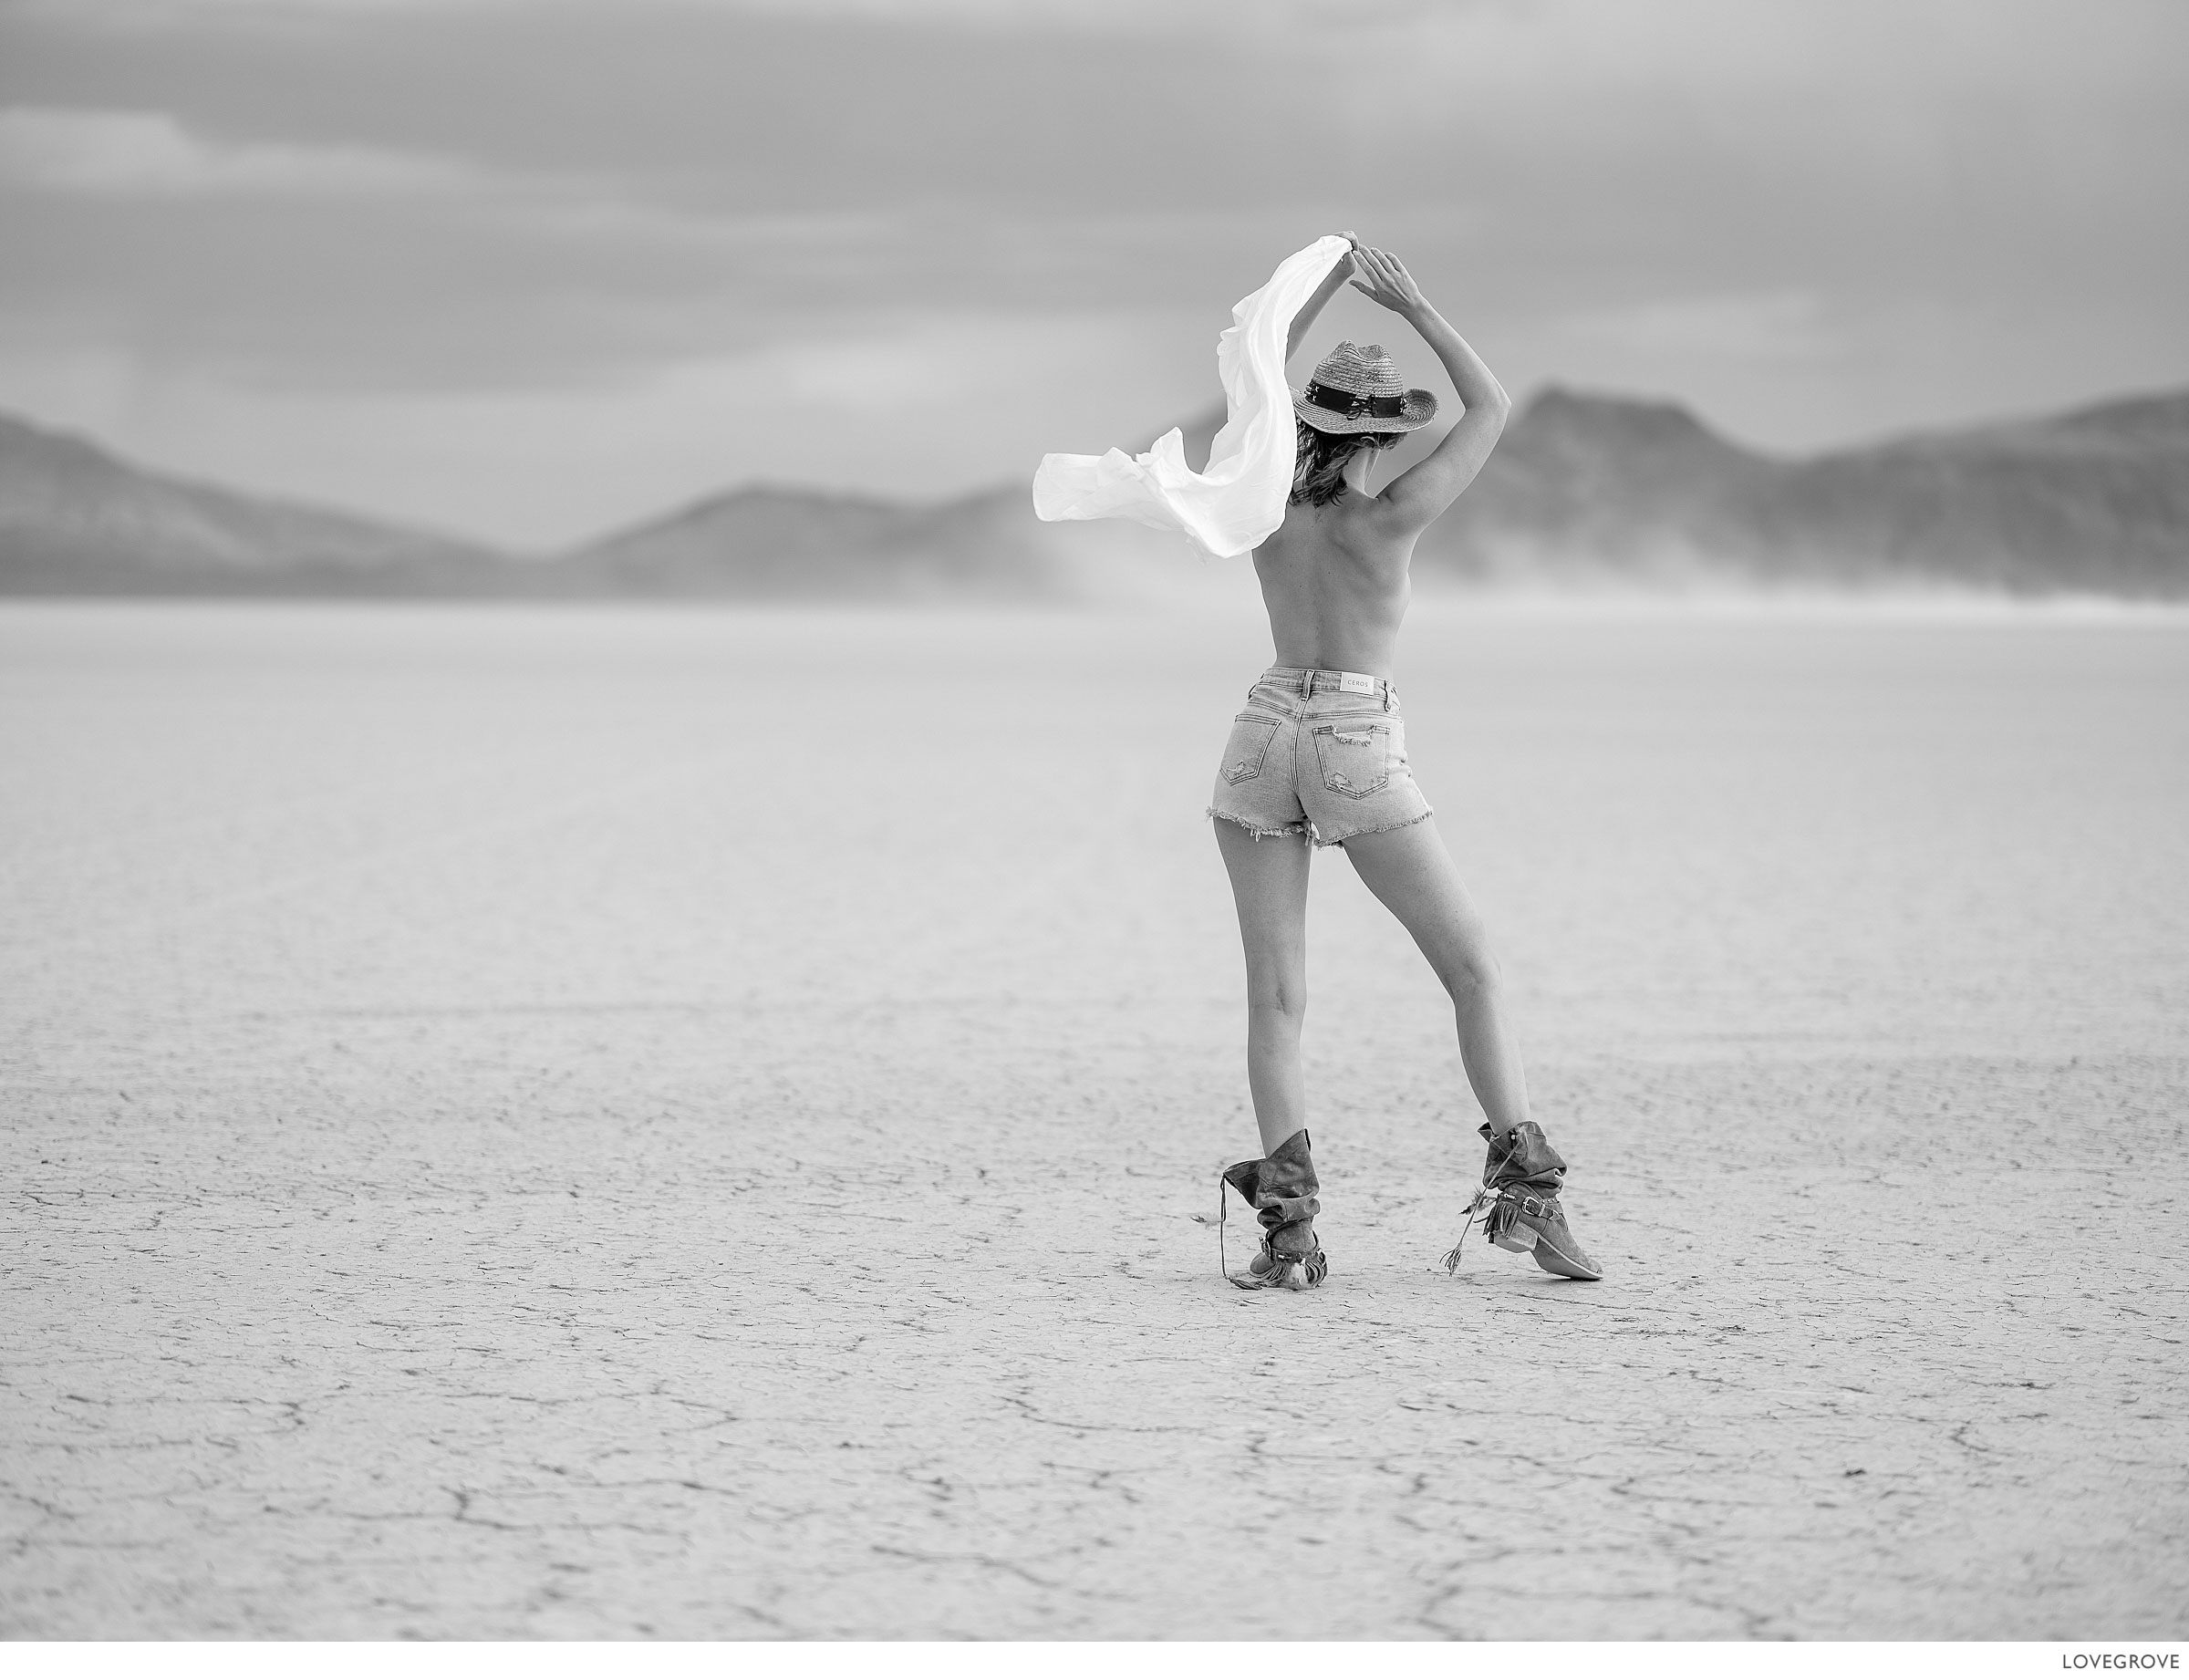 A girl turned away from camera on a dried up lake bed